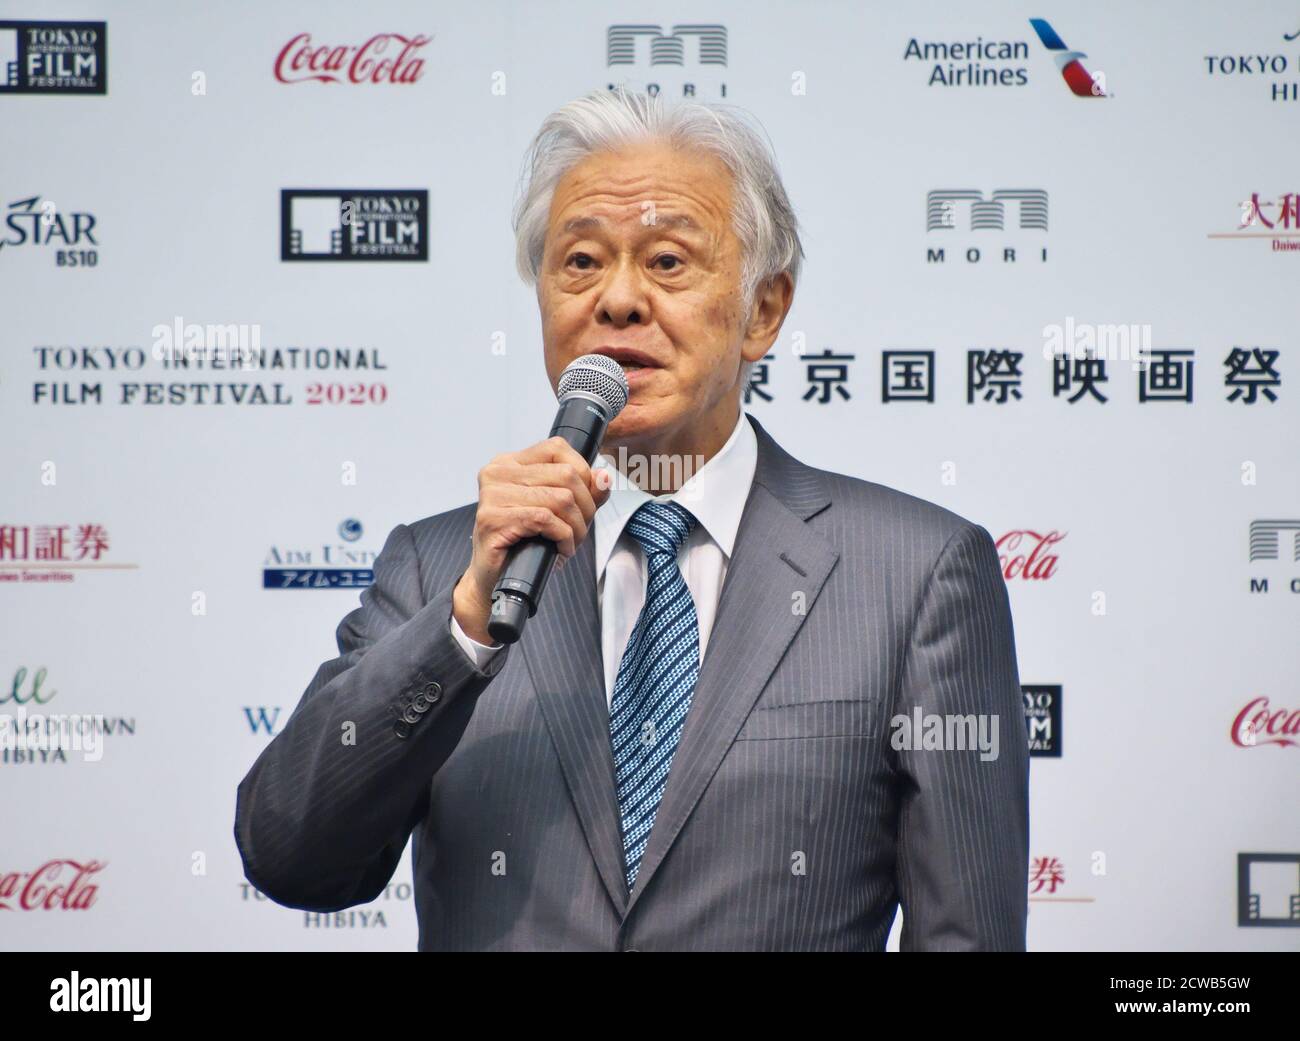 TIFF chairman Hiroyasu Ando attends the press conference for the Tokyo International Film Festival 2020 in Tokyo, Japan on Tuesday, September 29, 2020. This year's Tokyo festival is held on October 31st to November 9th collaborate with Tokyo Filmex. 25 films are world premieres, and the remaining seven films Asian premieres in this event.     Photo by Keizo Mori/UPI Stock Photo